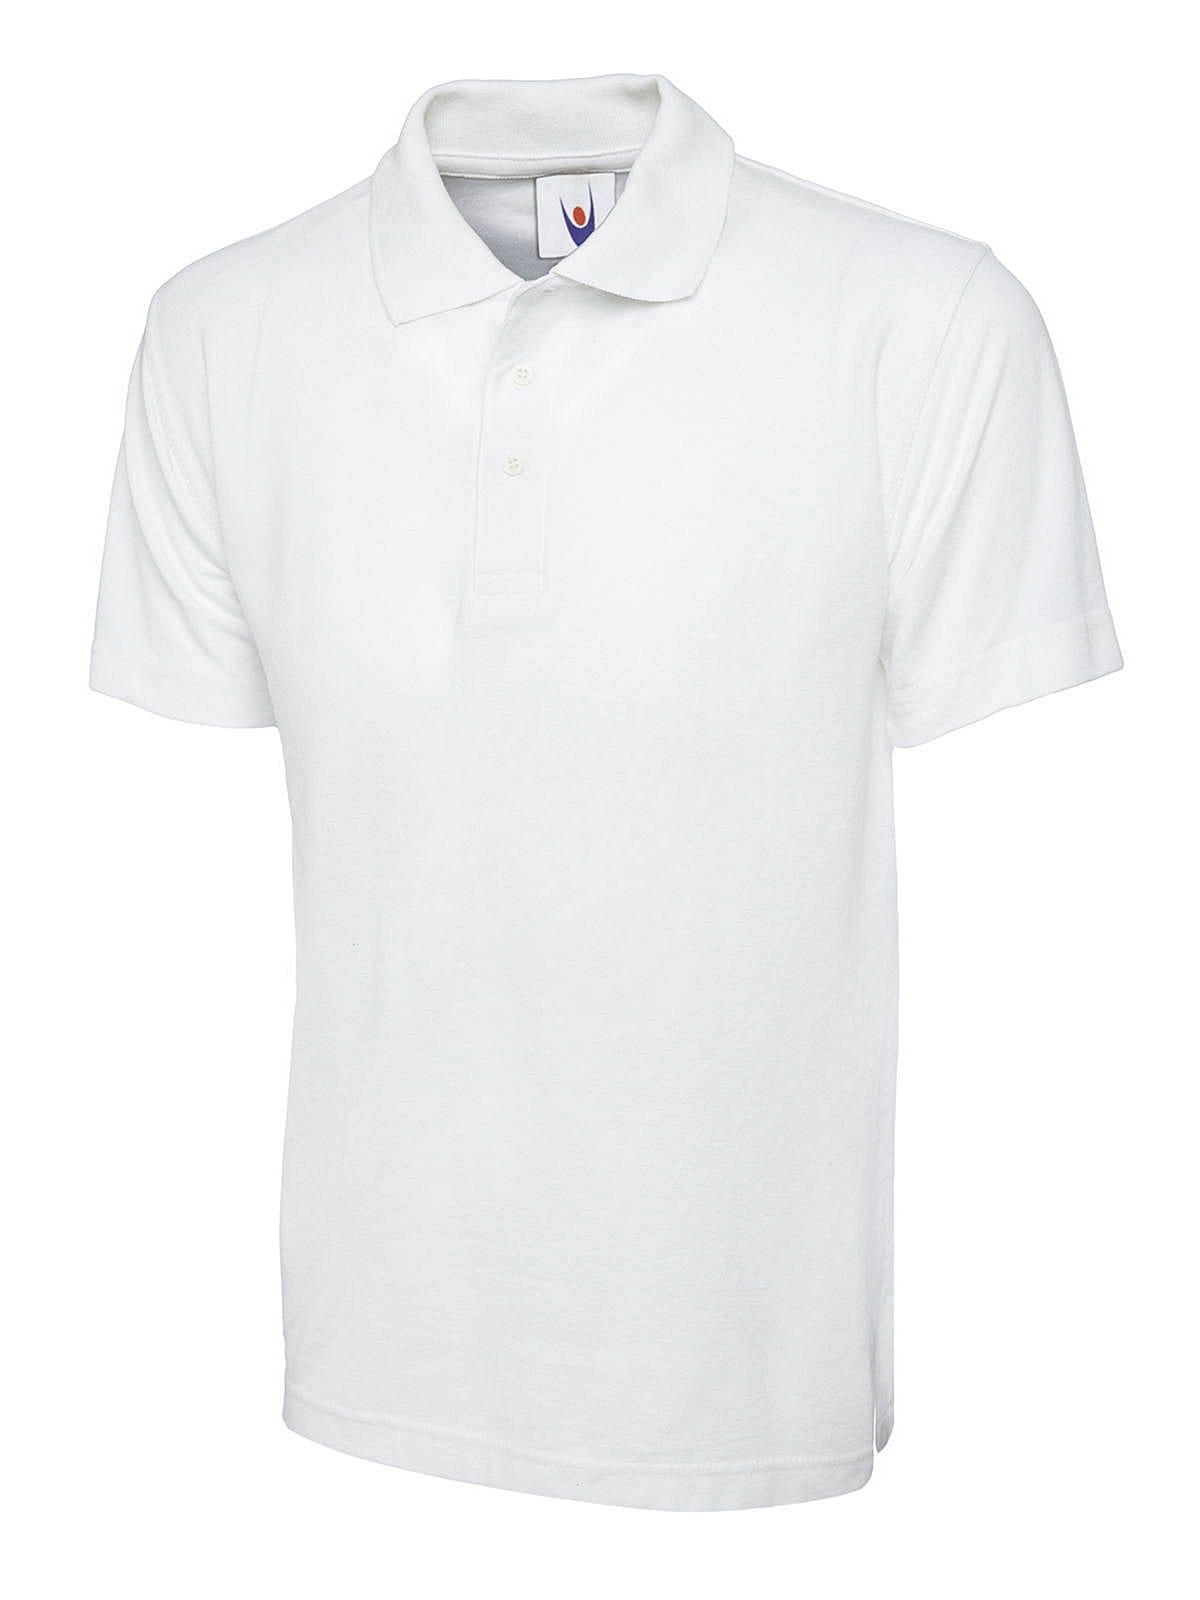 UC105 Uneek Active Polo Shirt Mens Sports Polo Top 200gsm 11 Colours Available 